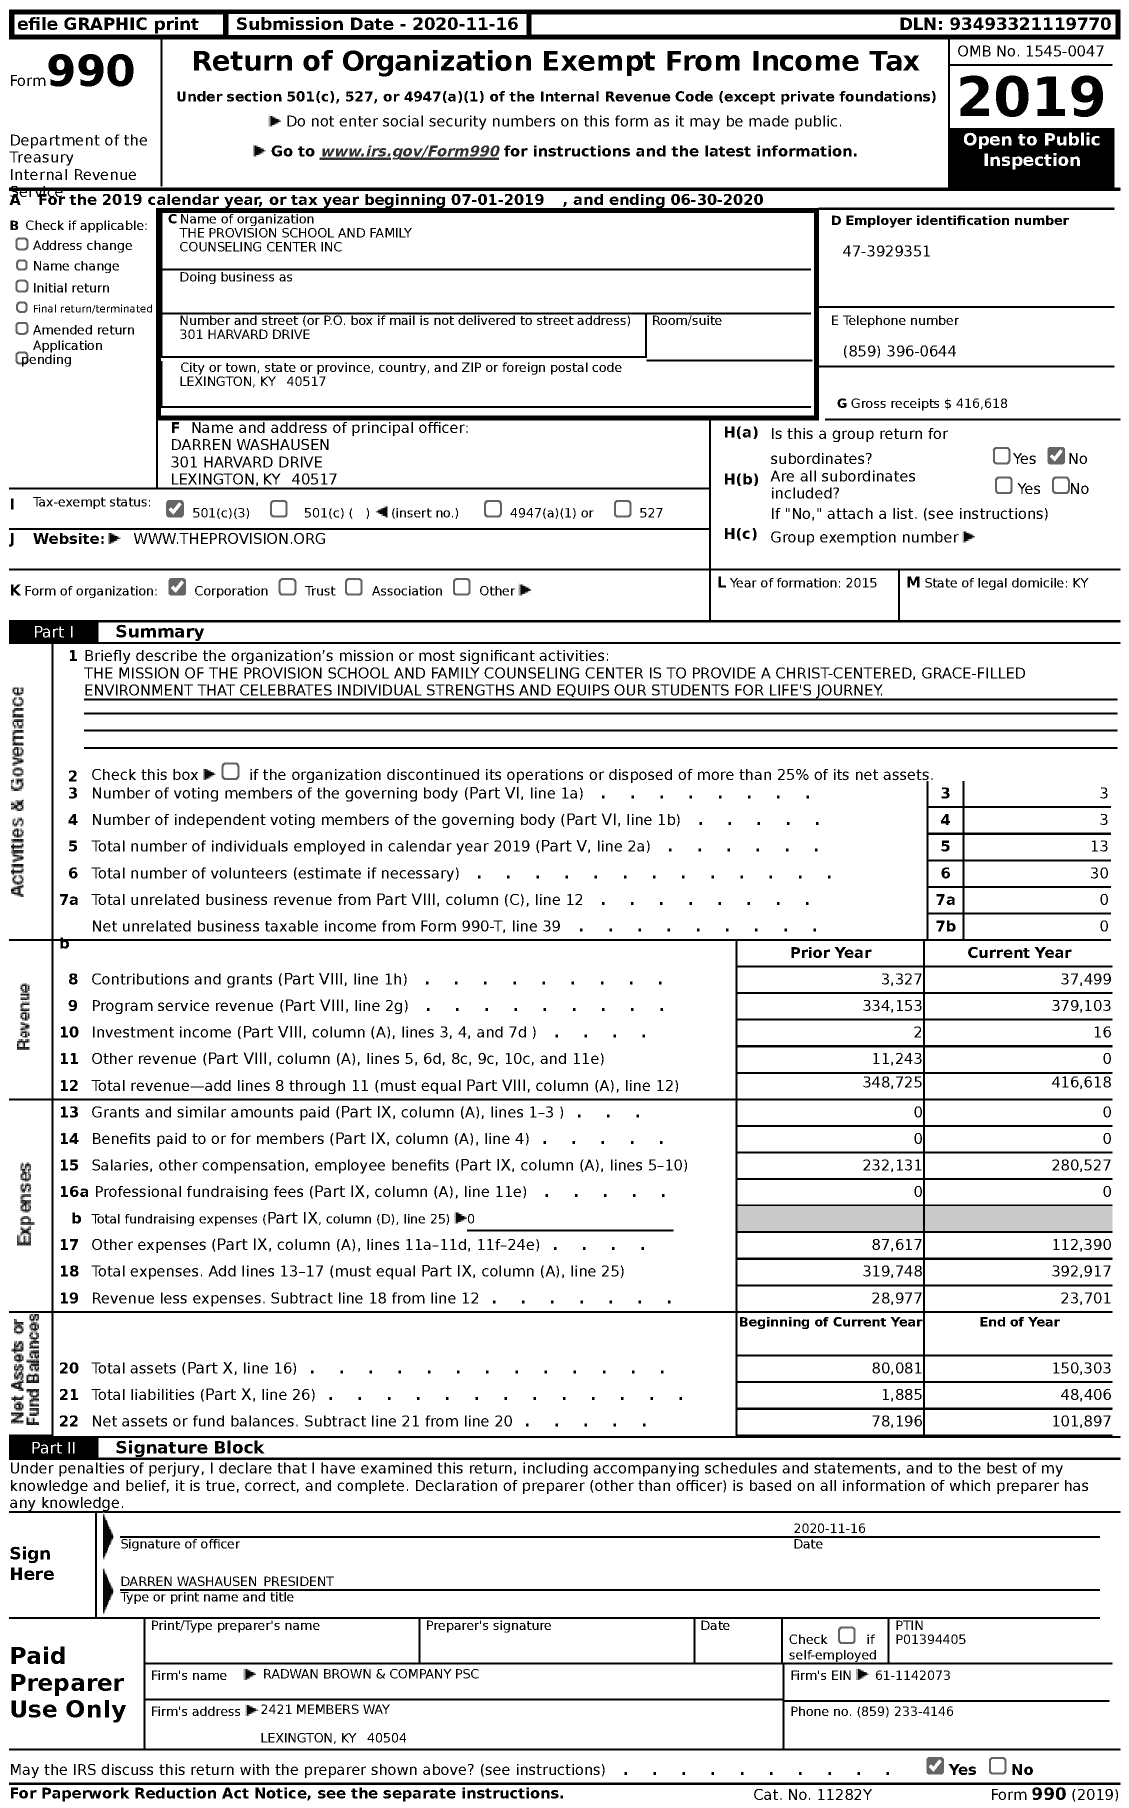 Image of first page of 2019 Form 990 for The Provision School and Family Counseling Center